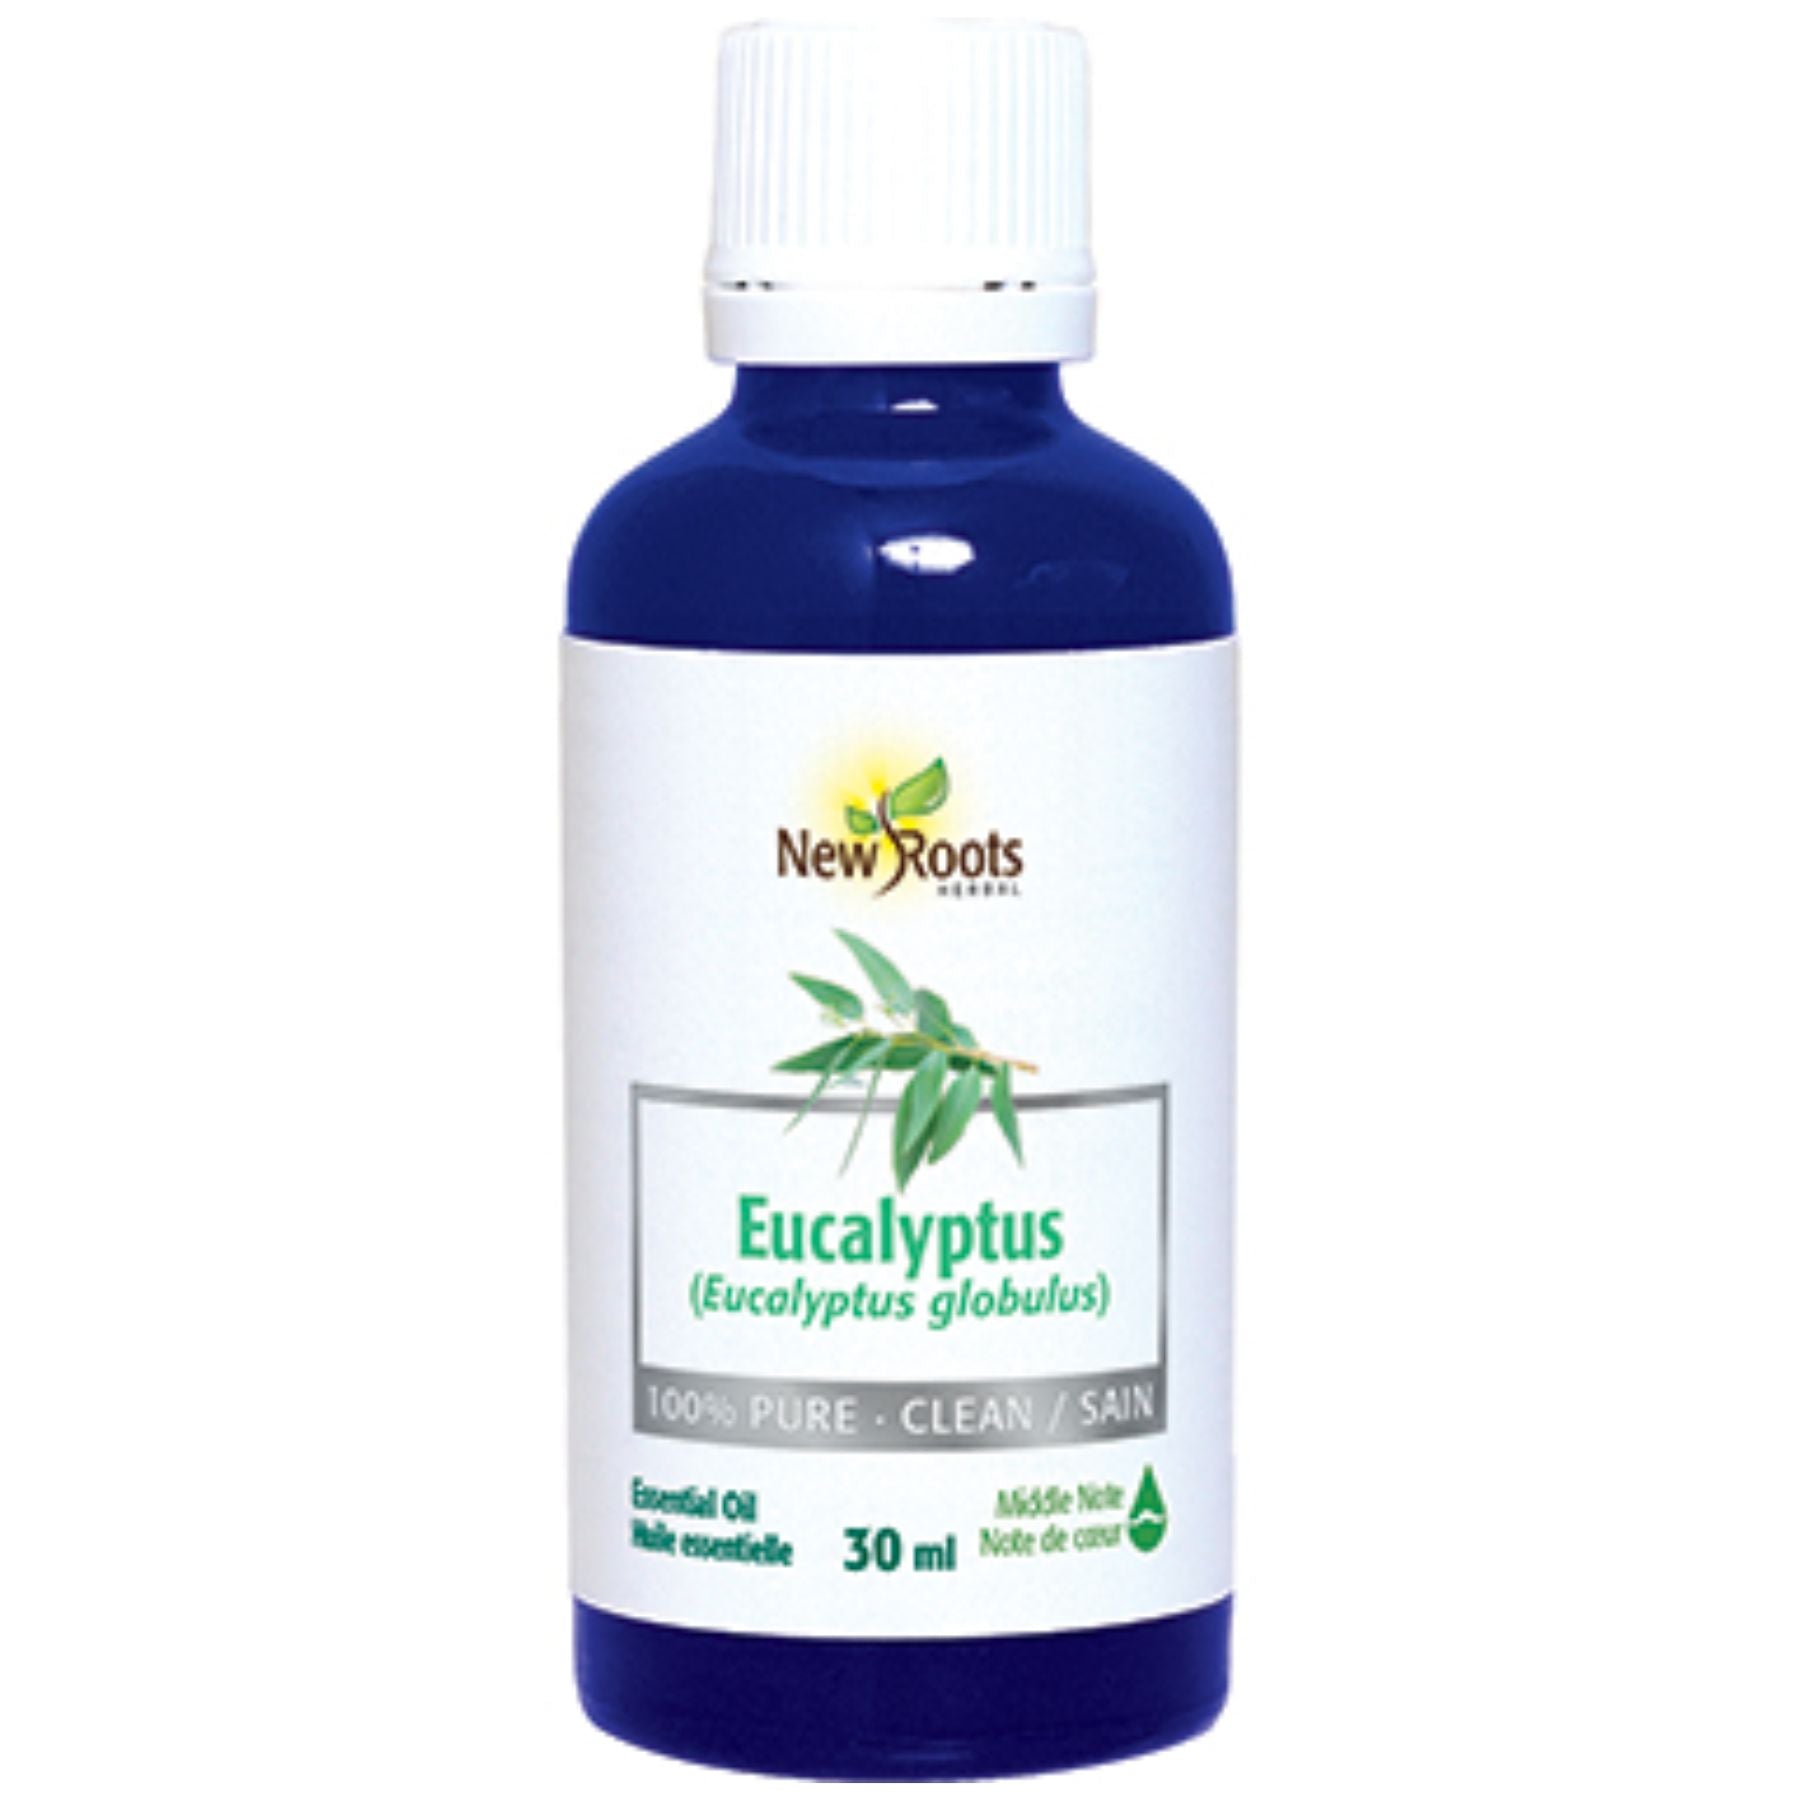 New Roots Eucalyptus Essential Oil 30ml